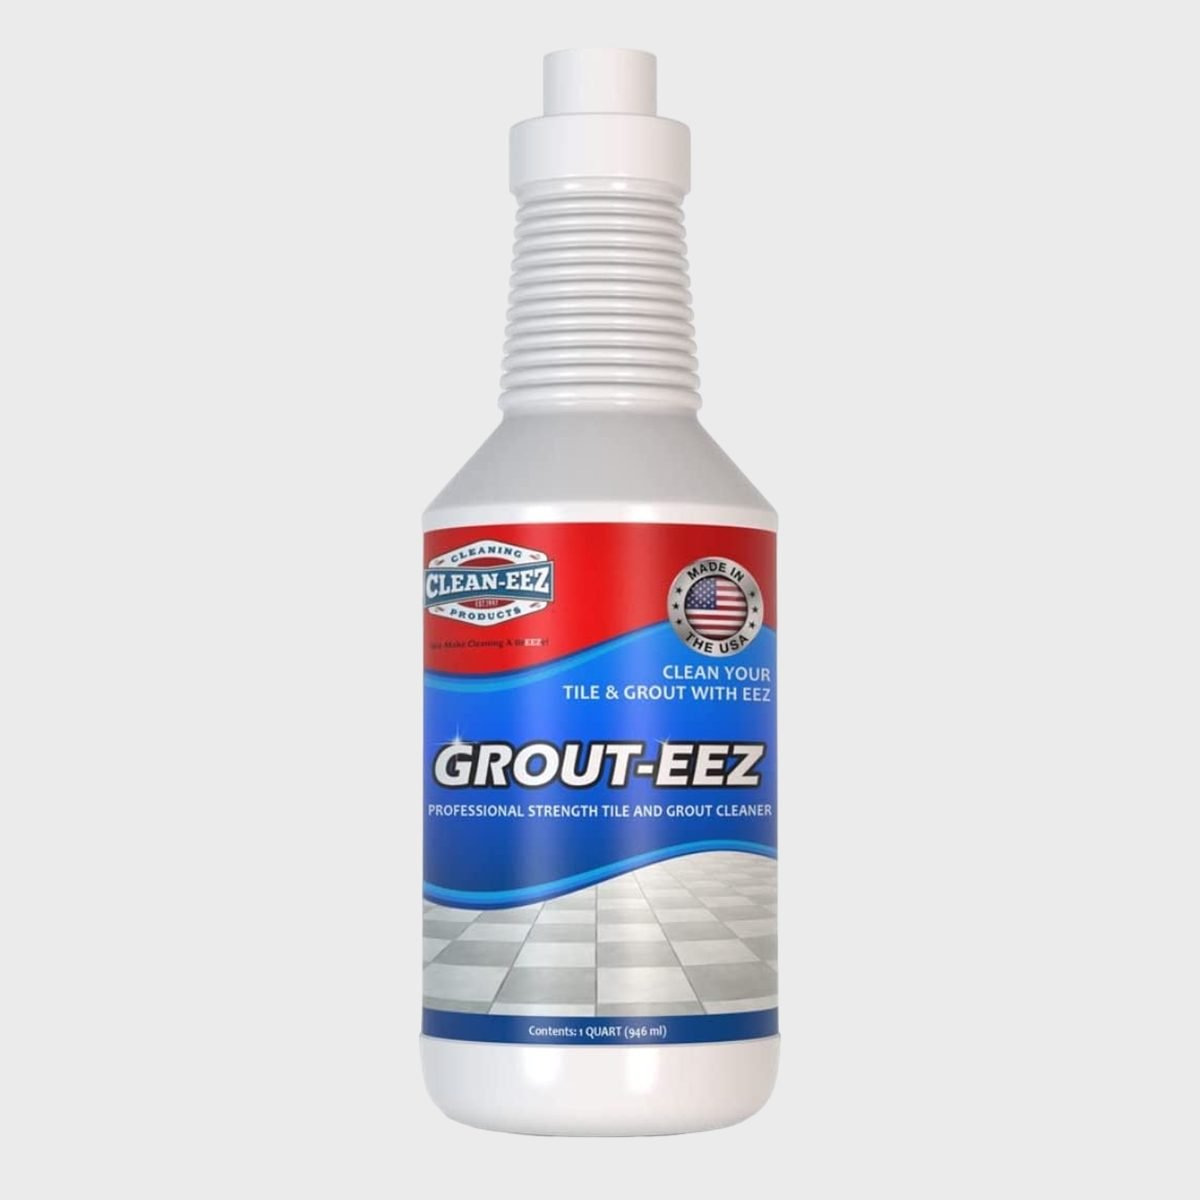 Goo Gone Grout and Tile Cleaner - 28 Ounce - Removes Tough Stains Dirt  Caused by Mold Mildew Soap Scum and Hard Water Staining - Safe on Tile  Ceramic